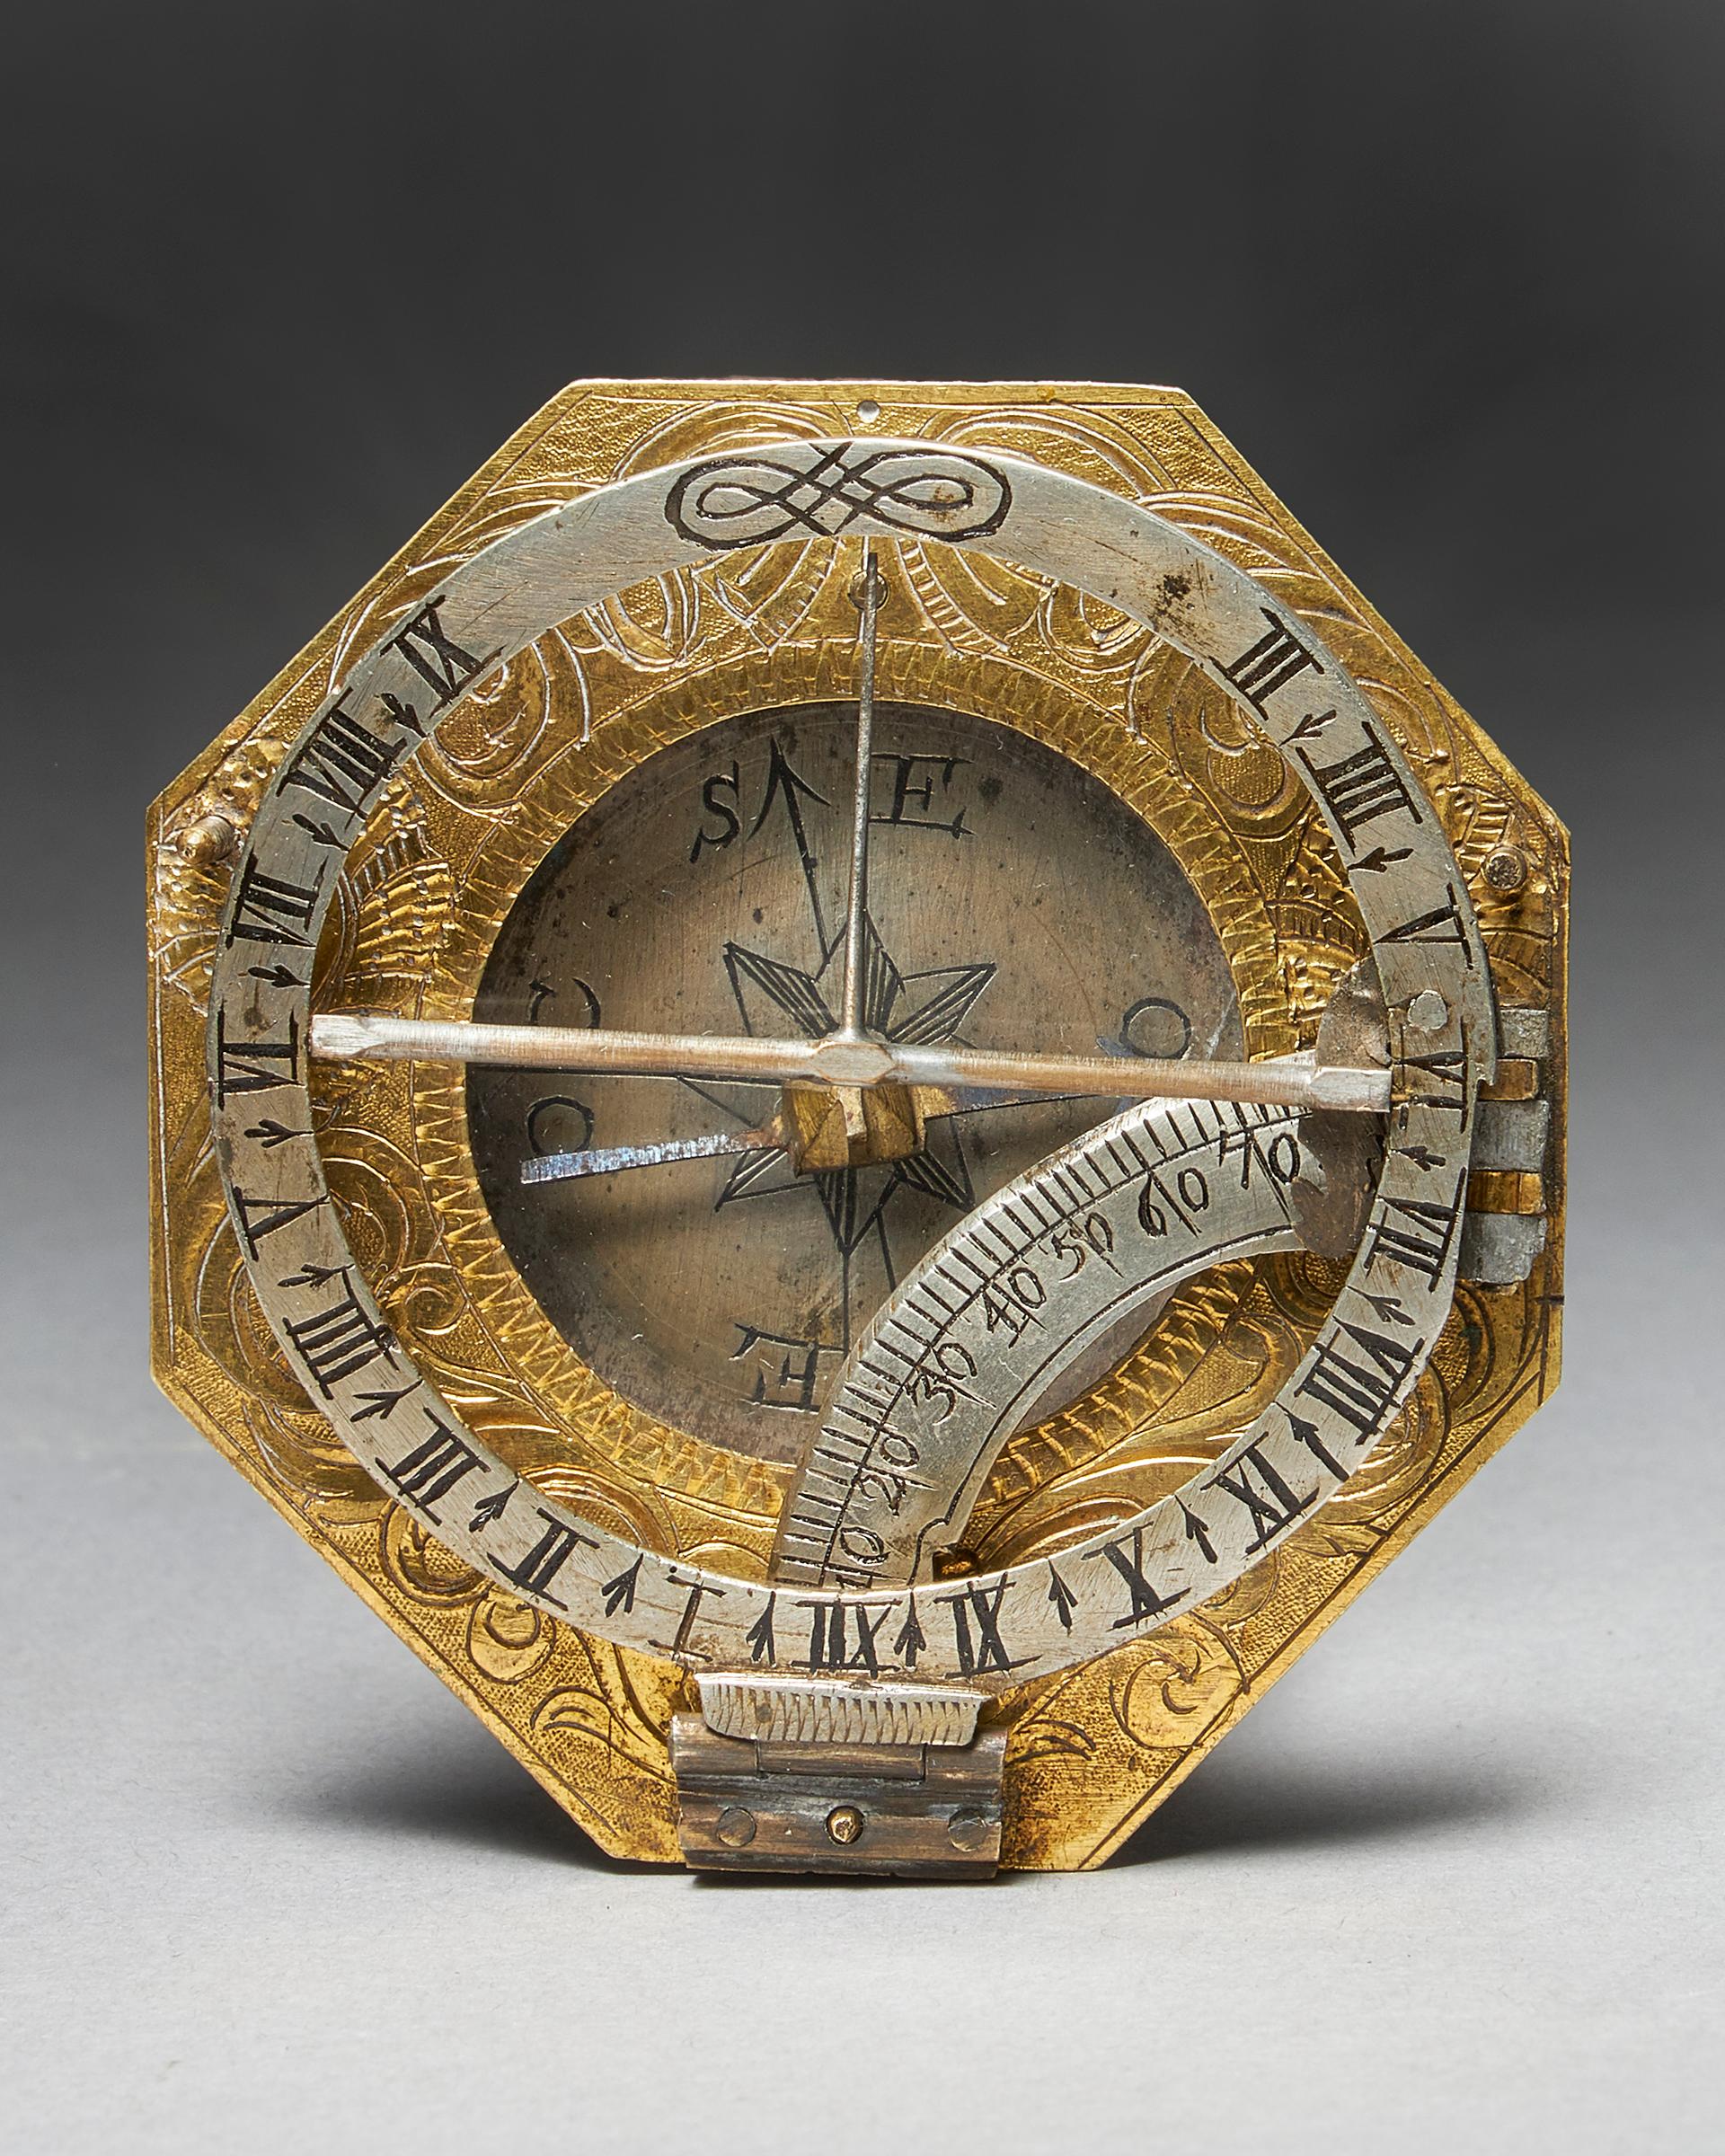 From the first quarter of the 18th century - a German brass equinoctial pocket sundial by Ludwig Theodor Muller, Augsburg. The sundial consists of three parts: a richly engraved octagonally shaped gilt brass base, which holds a recessed compass with